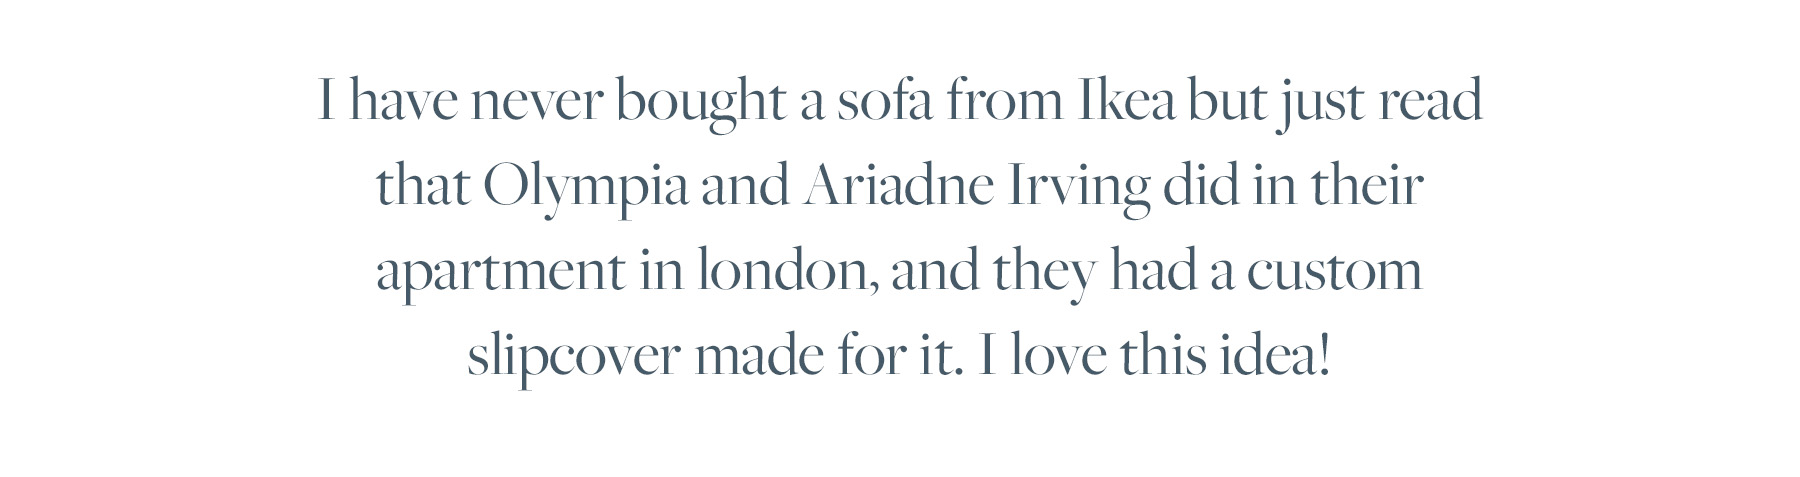 I have never bought a sofa from Ikea but just read that Olympia and Ariadne Irving did in their apartment in london, and they had a custom slipcover made for it. I love this idea!